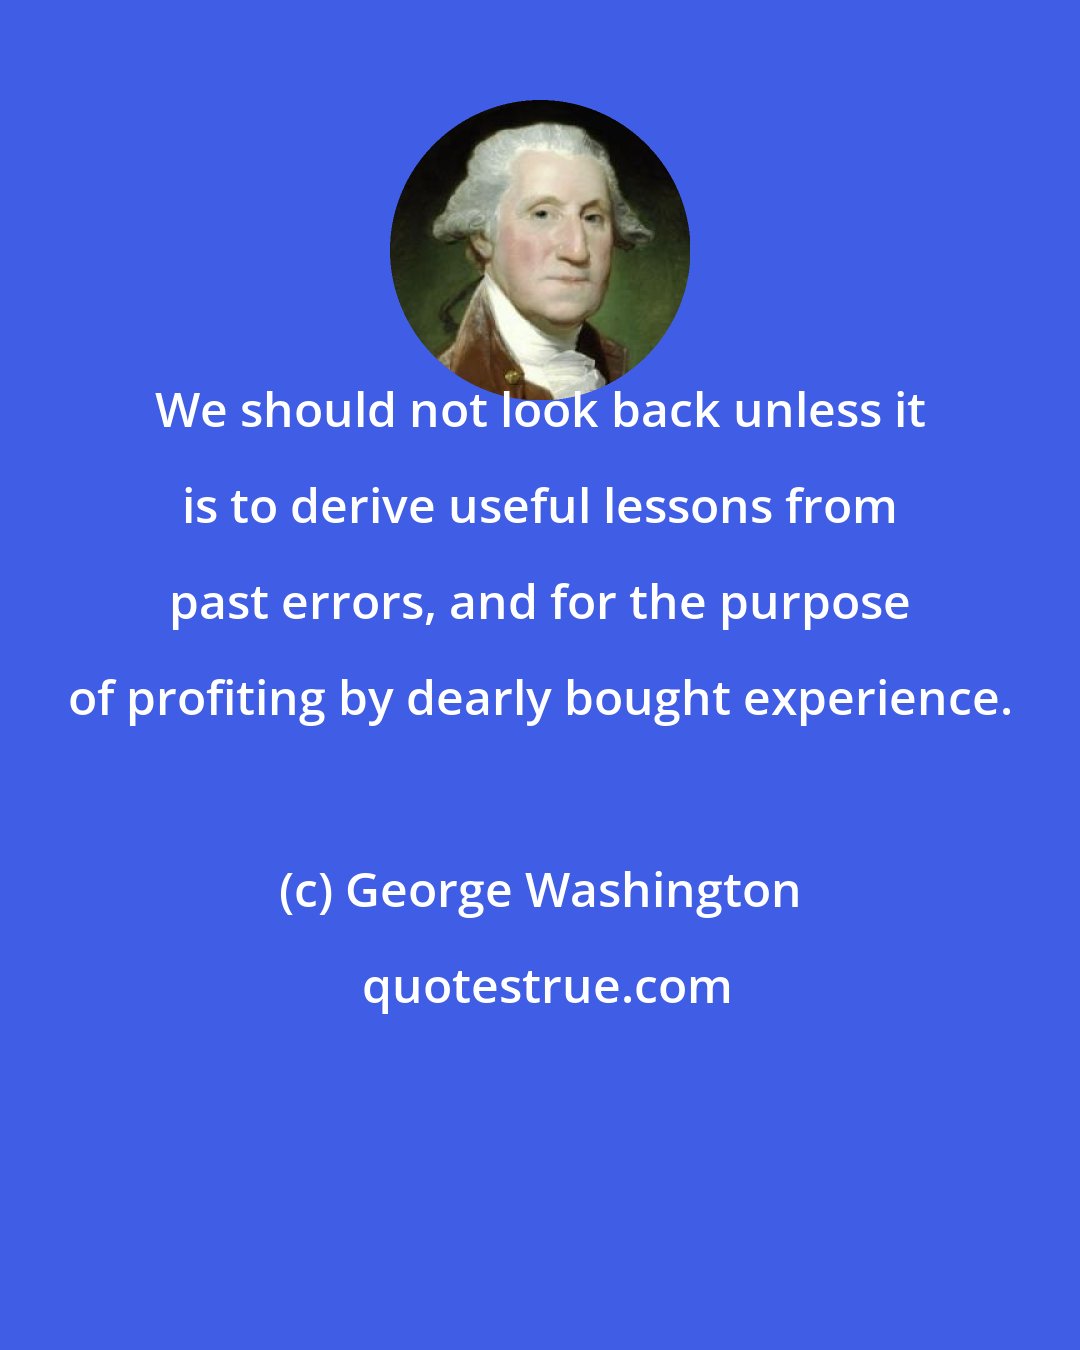 George Washington: We should not look back unless it is to derive useful lessons from past errors, and for the purpose of profiting by dearly bought experience.